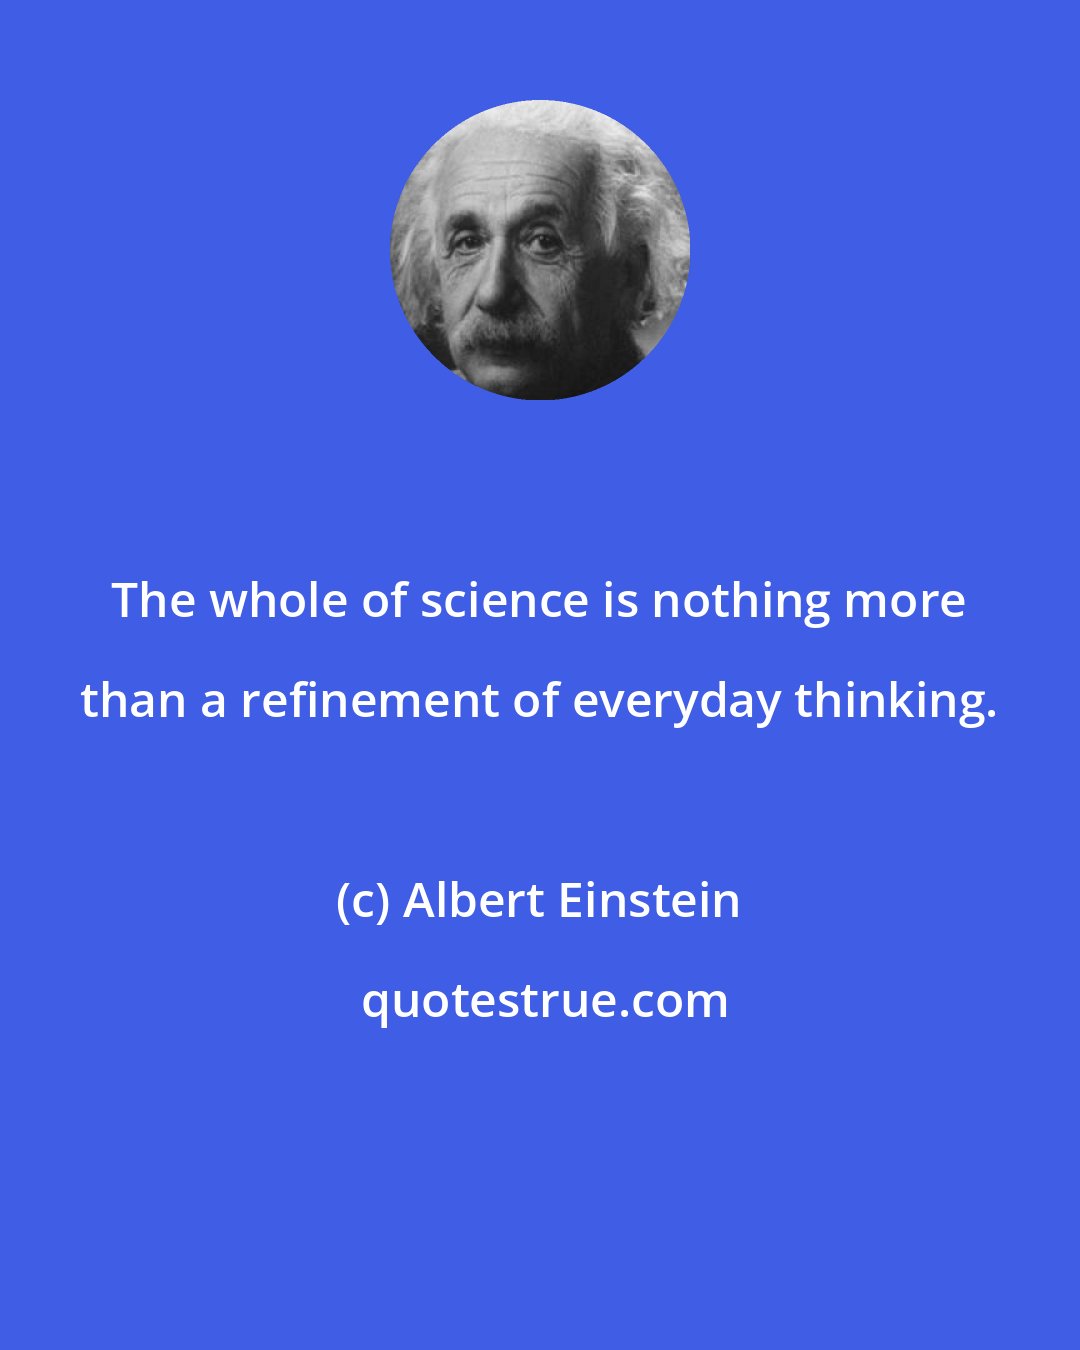 Albert Einstein: The whole of science is nothing more than a refinement of everyday thinking.